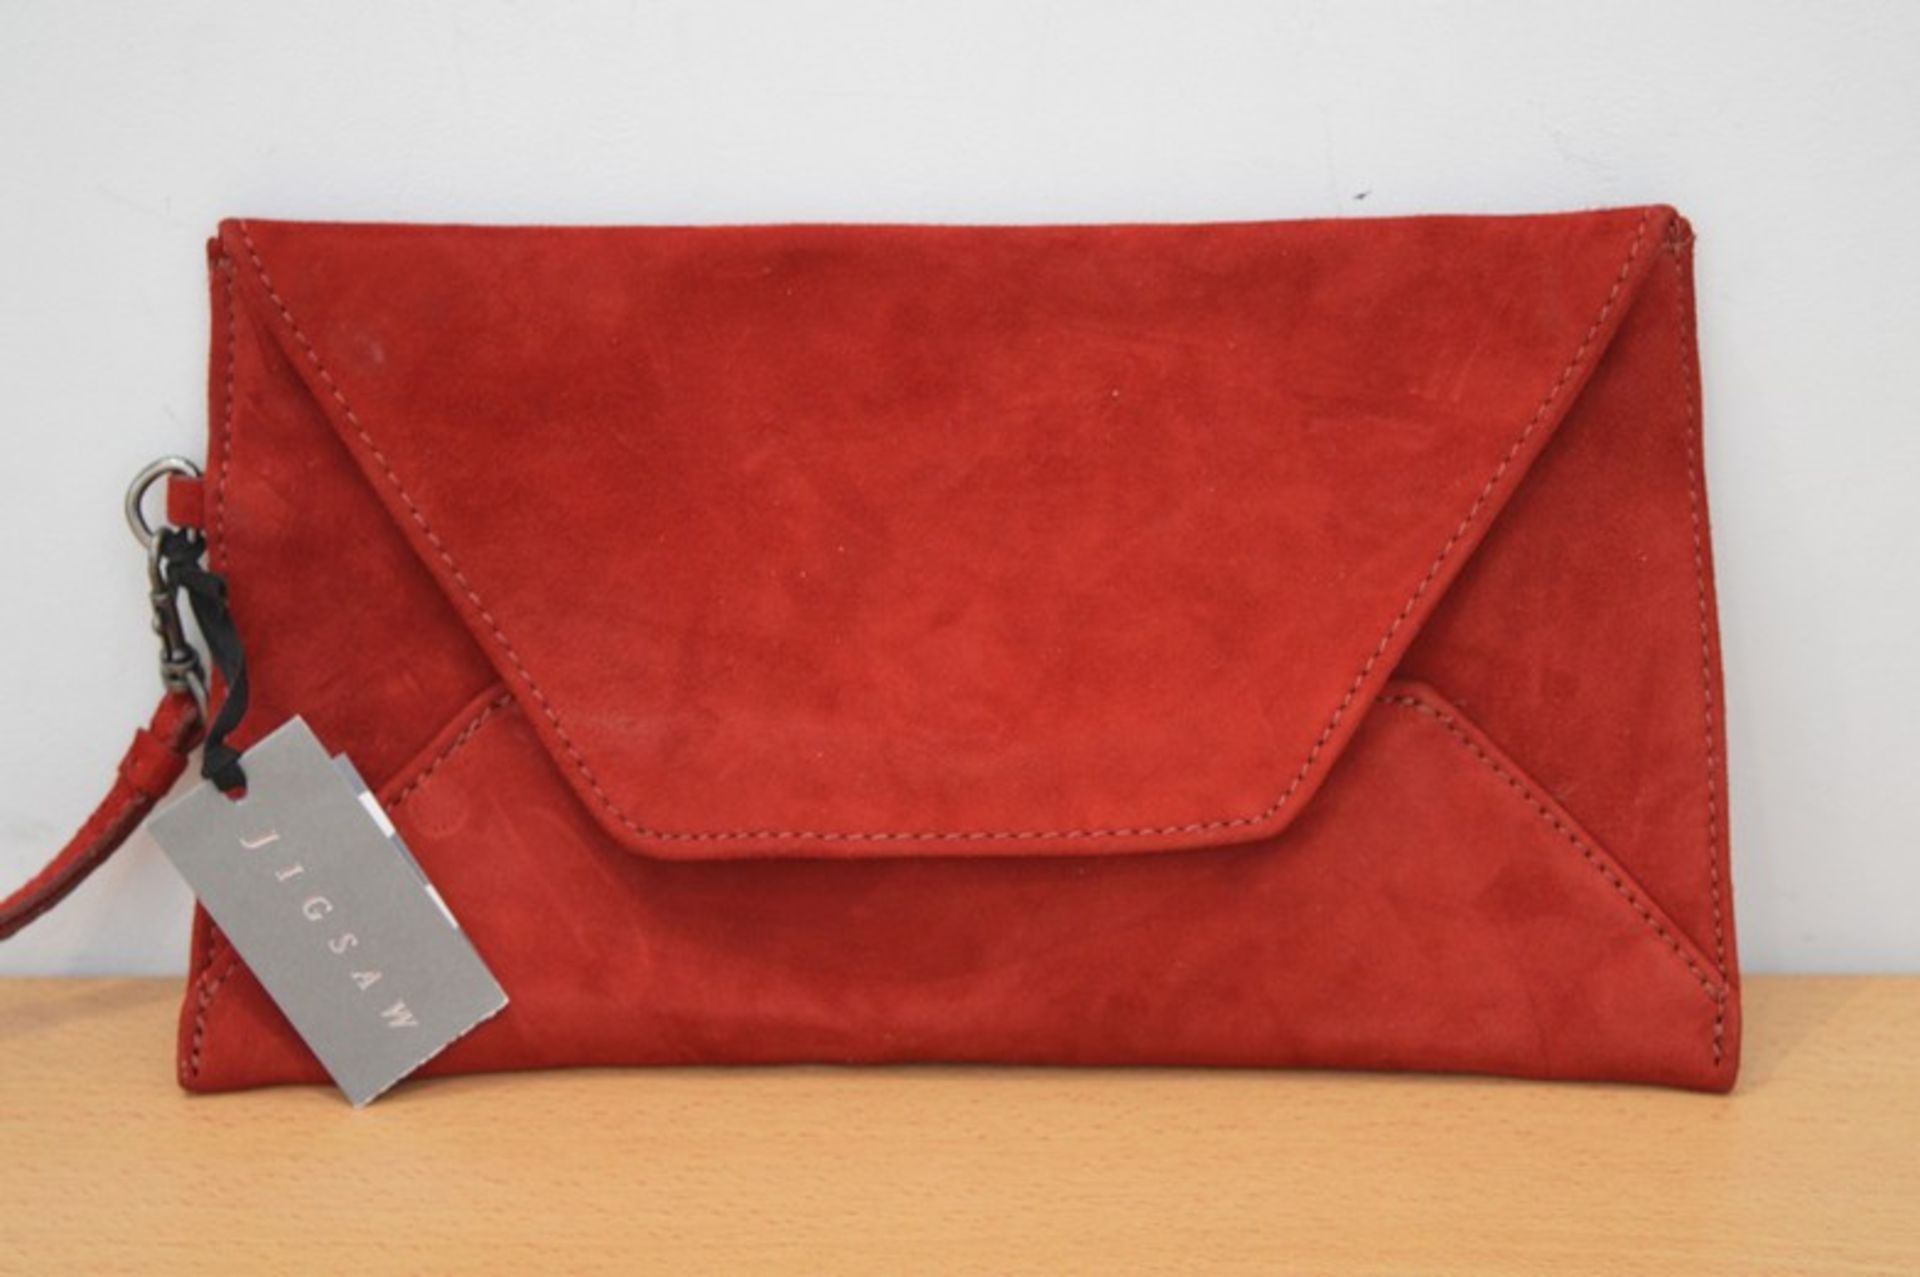 BRAND NEW WITH LABELS JIGSAW RED SUEDE LADIES NIGHT CLUTH BAG RRP £55 (DSCLIP)(20.05.15)